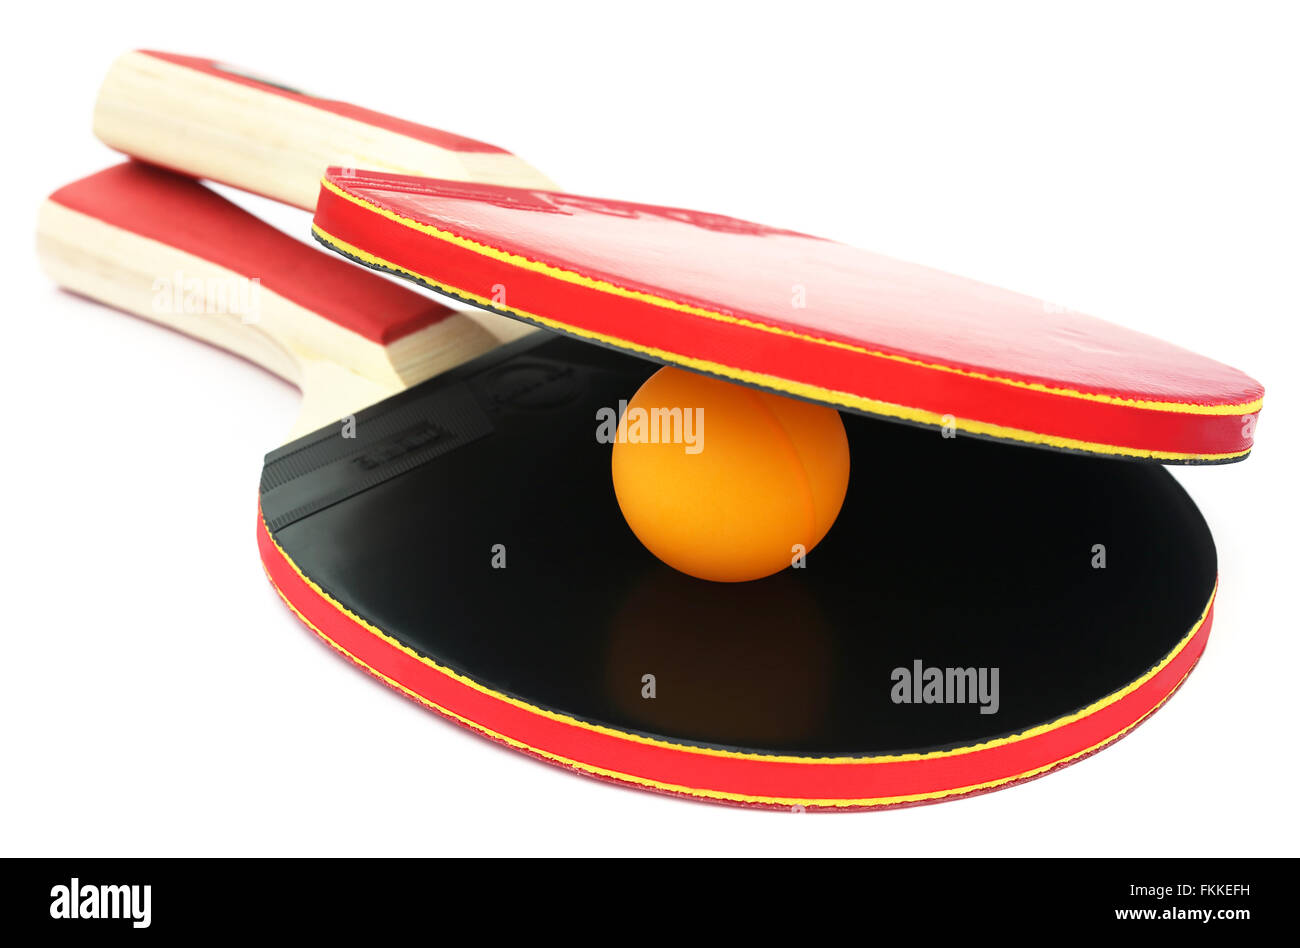 Table tennis bat and ball over white background Stock Photo